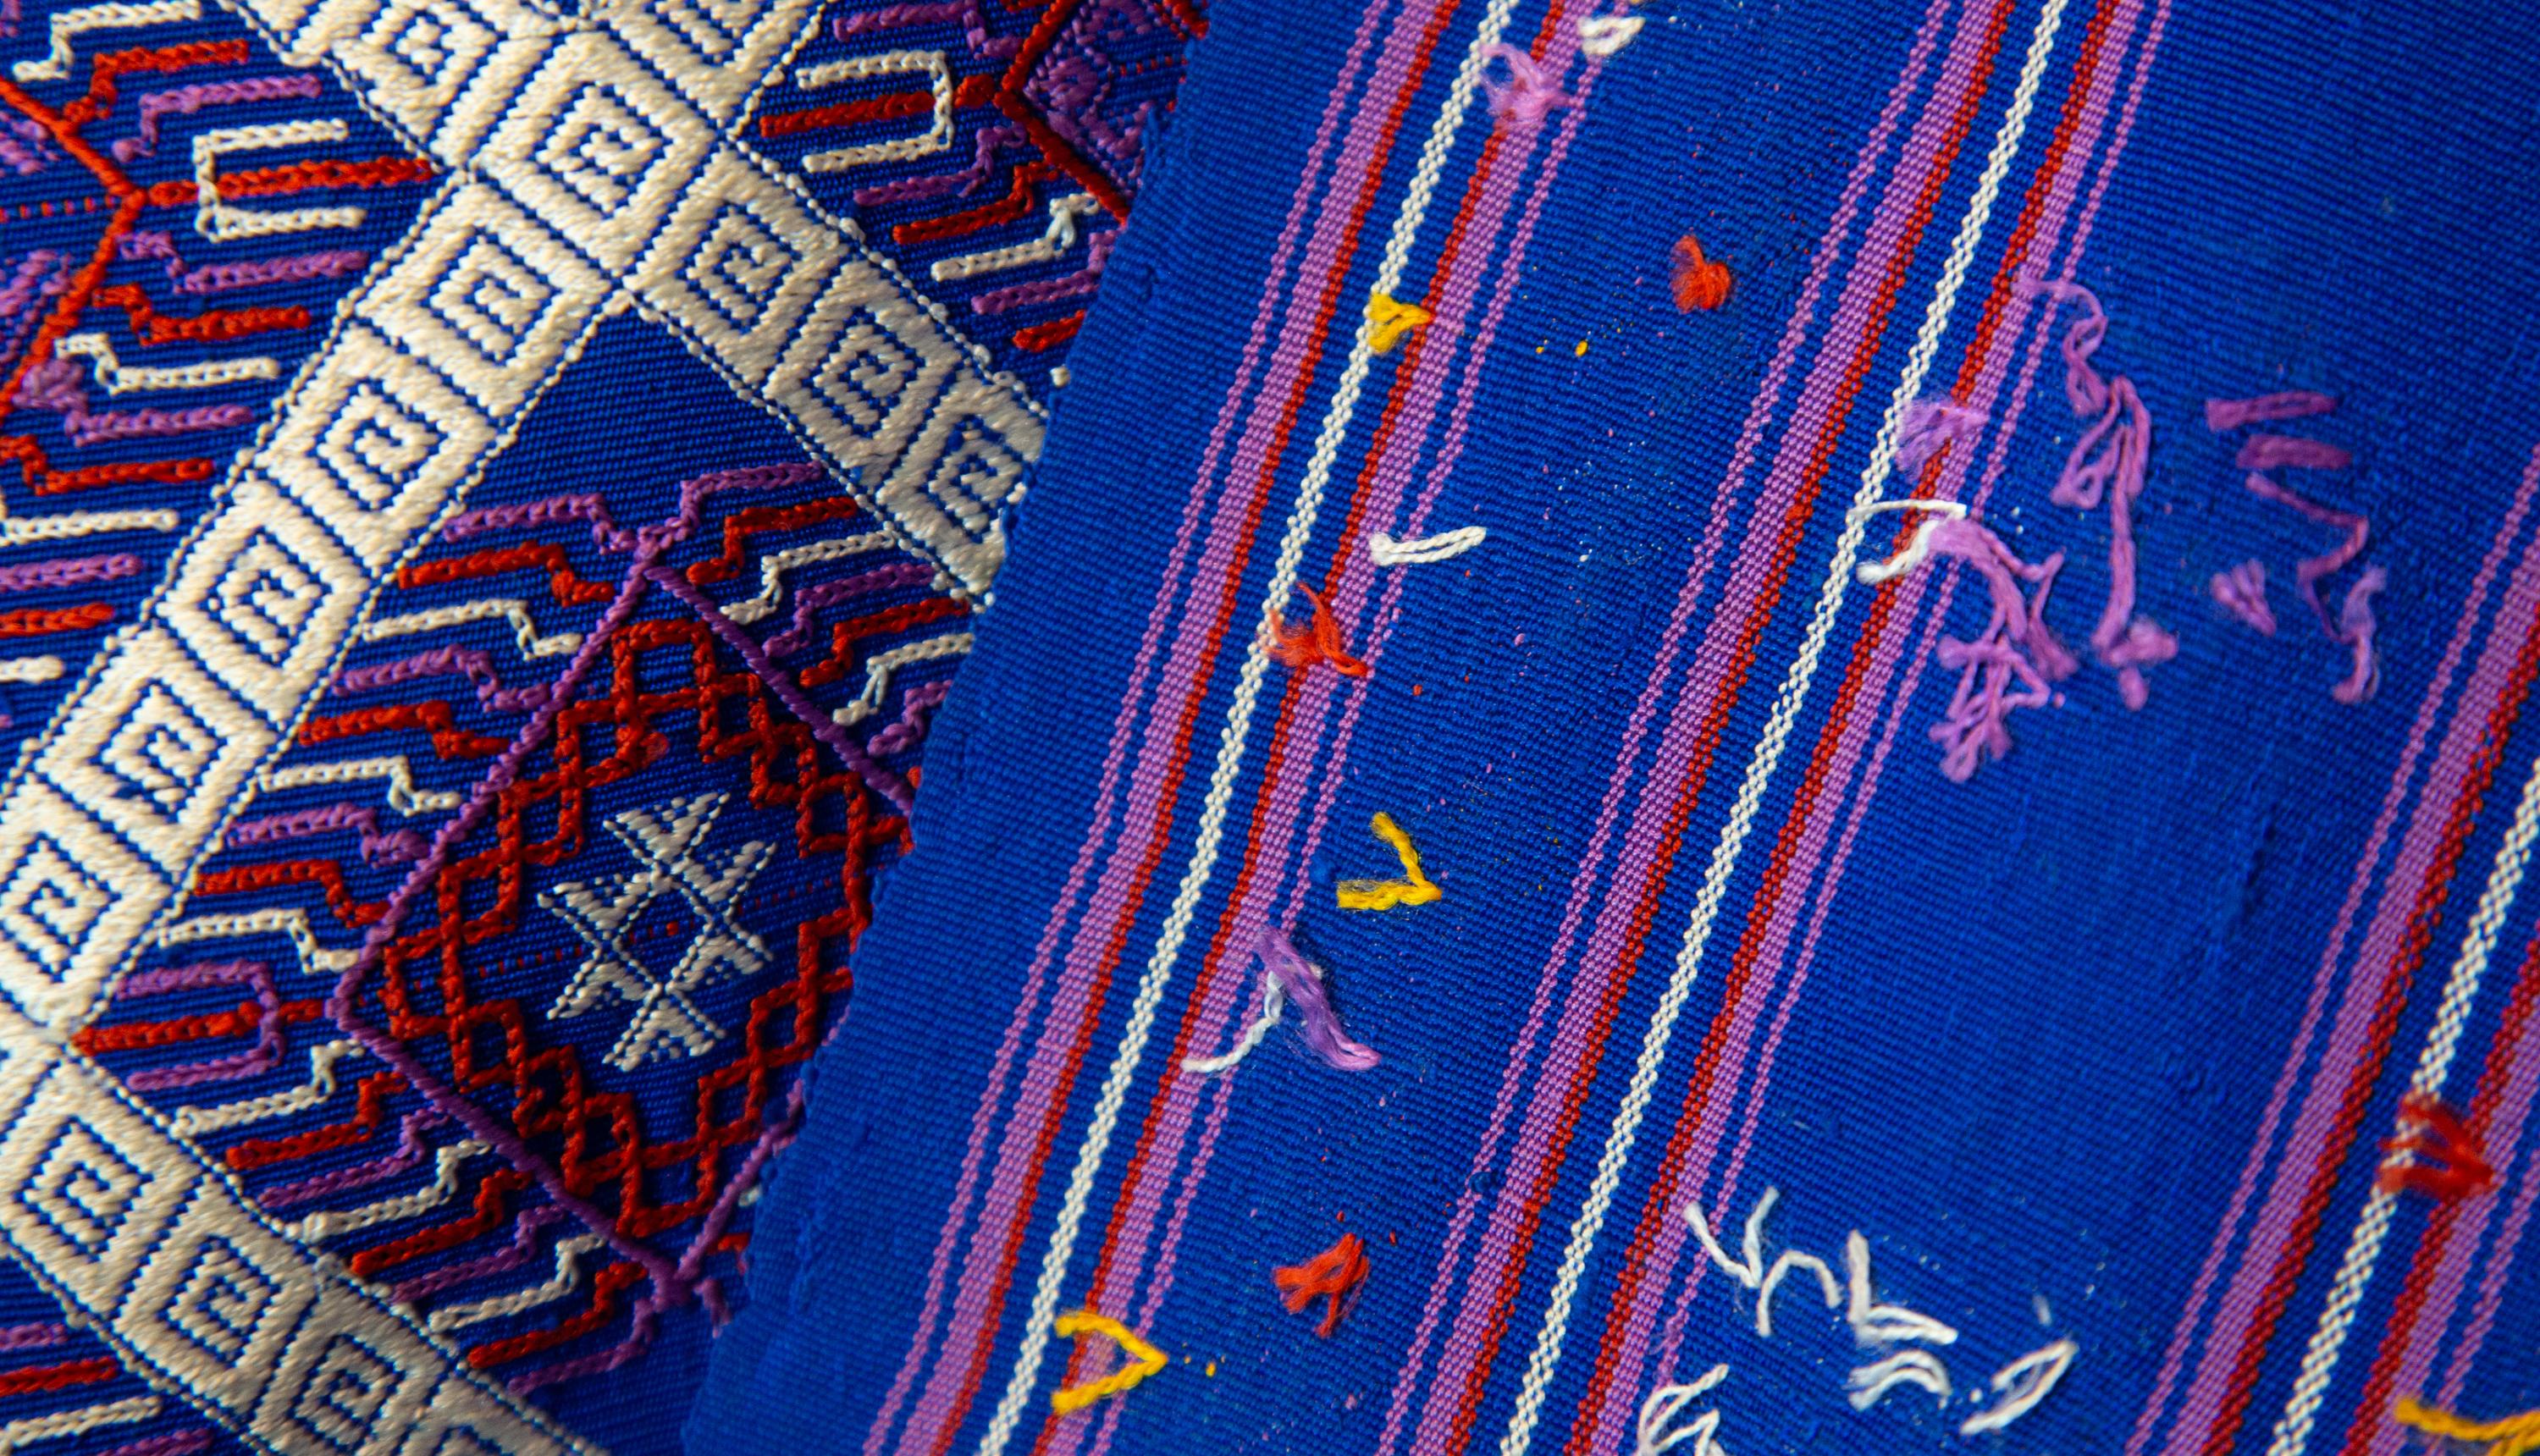 Bhutanese silk woven Kira Textile, Purple. From the royal weavers of Bhutan, this kira textile is a rectangular weaving worn as an ankle length dress by Bhutanese women. This example was originally woven for her Majesty Gyalyum (Queen Mother) Sangay